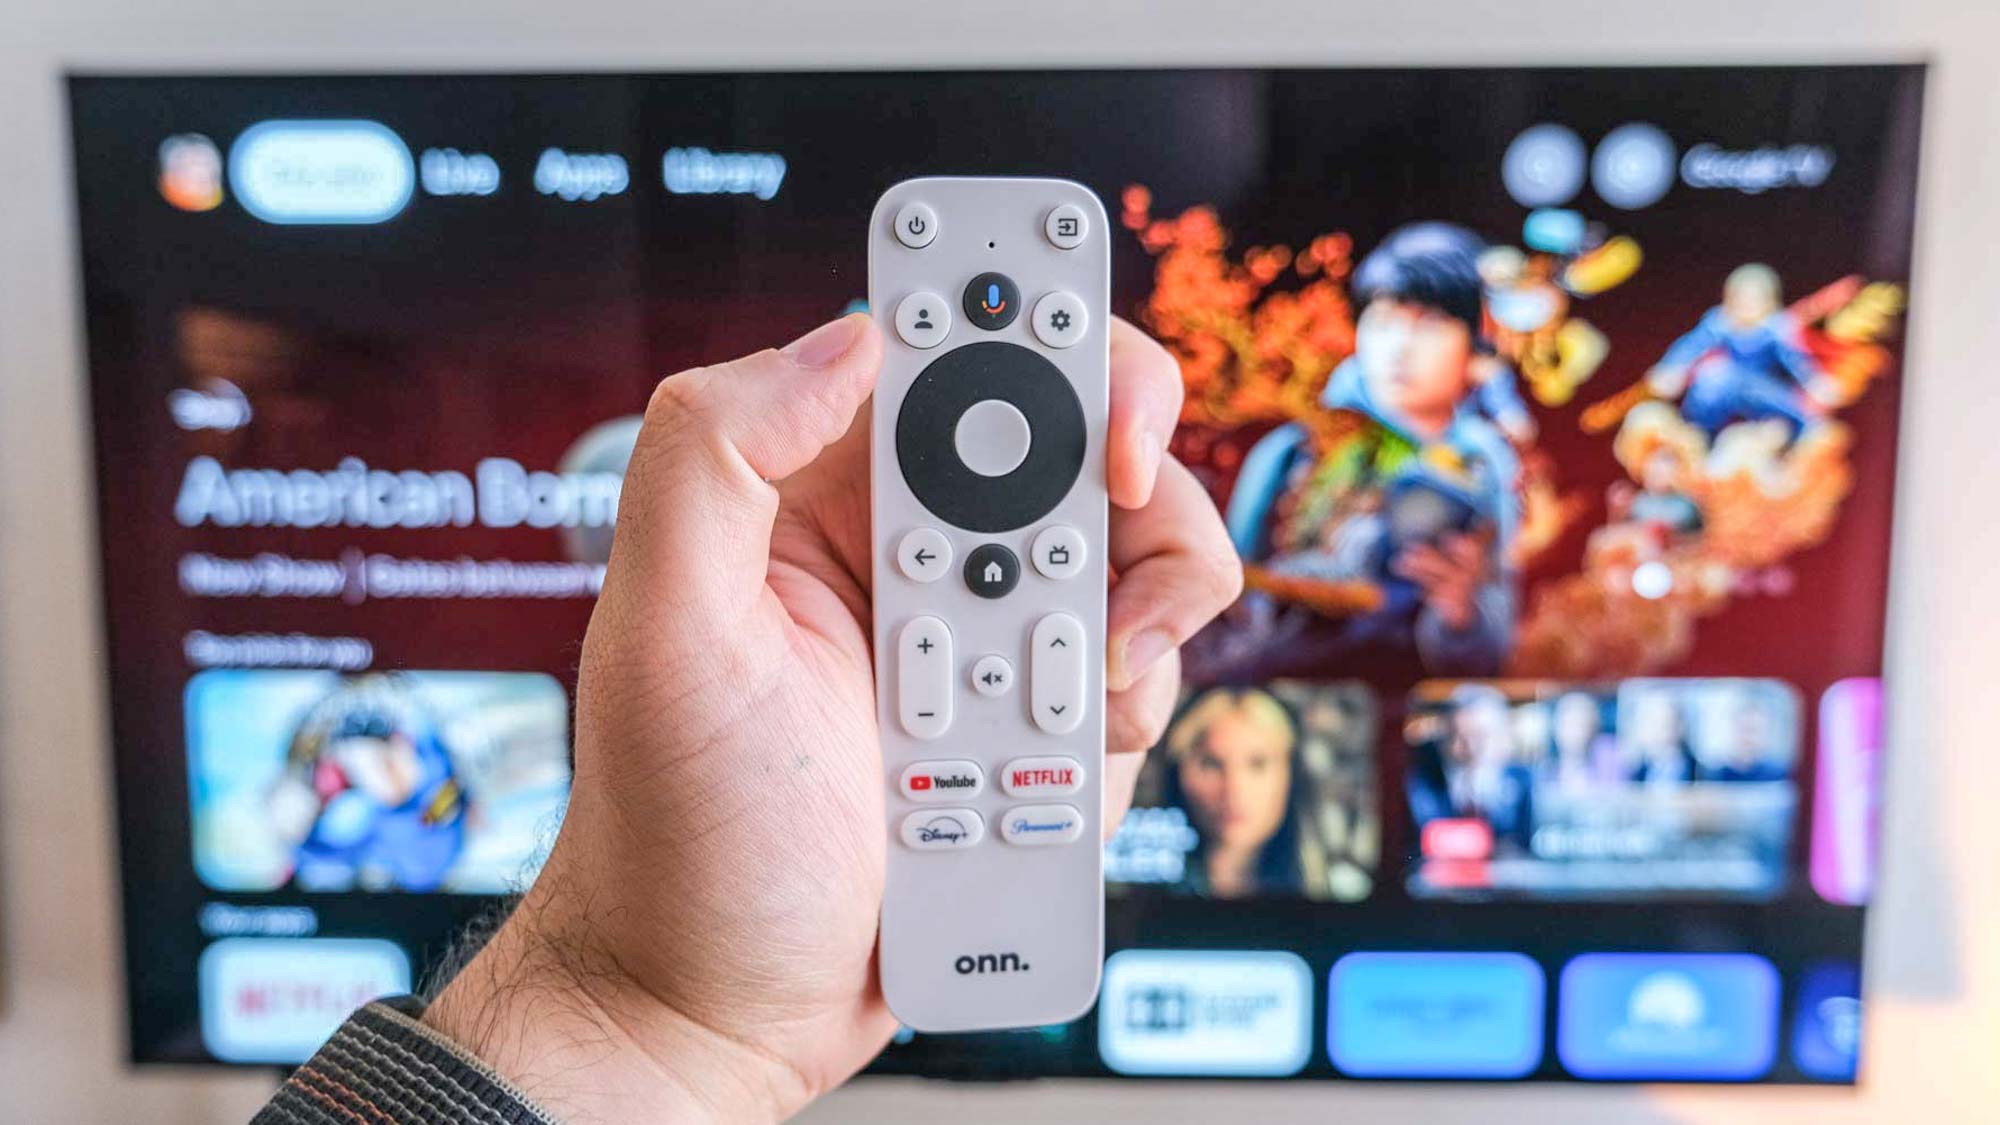 s latest Fire TV Stick is on sale for just $20